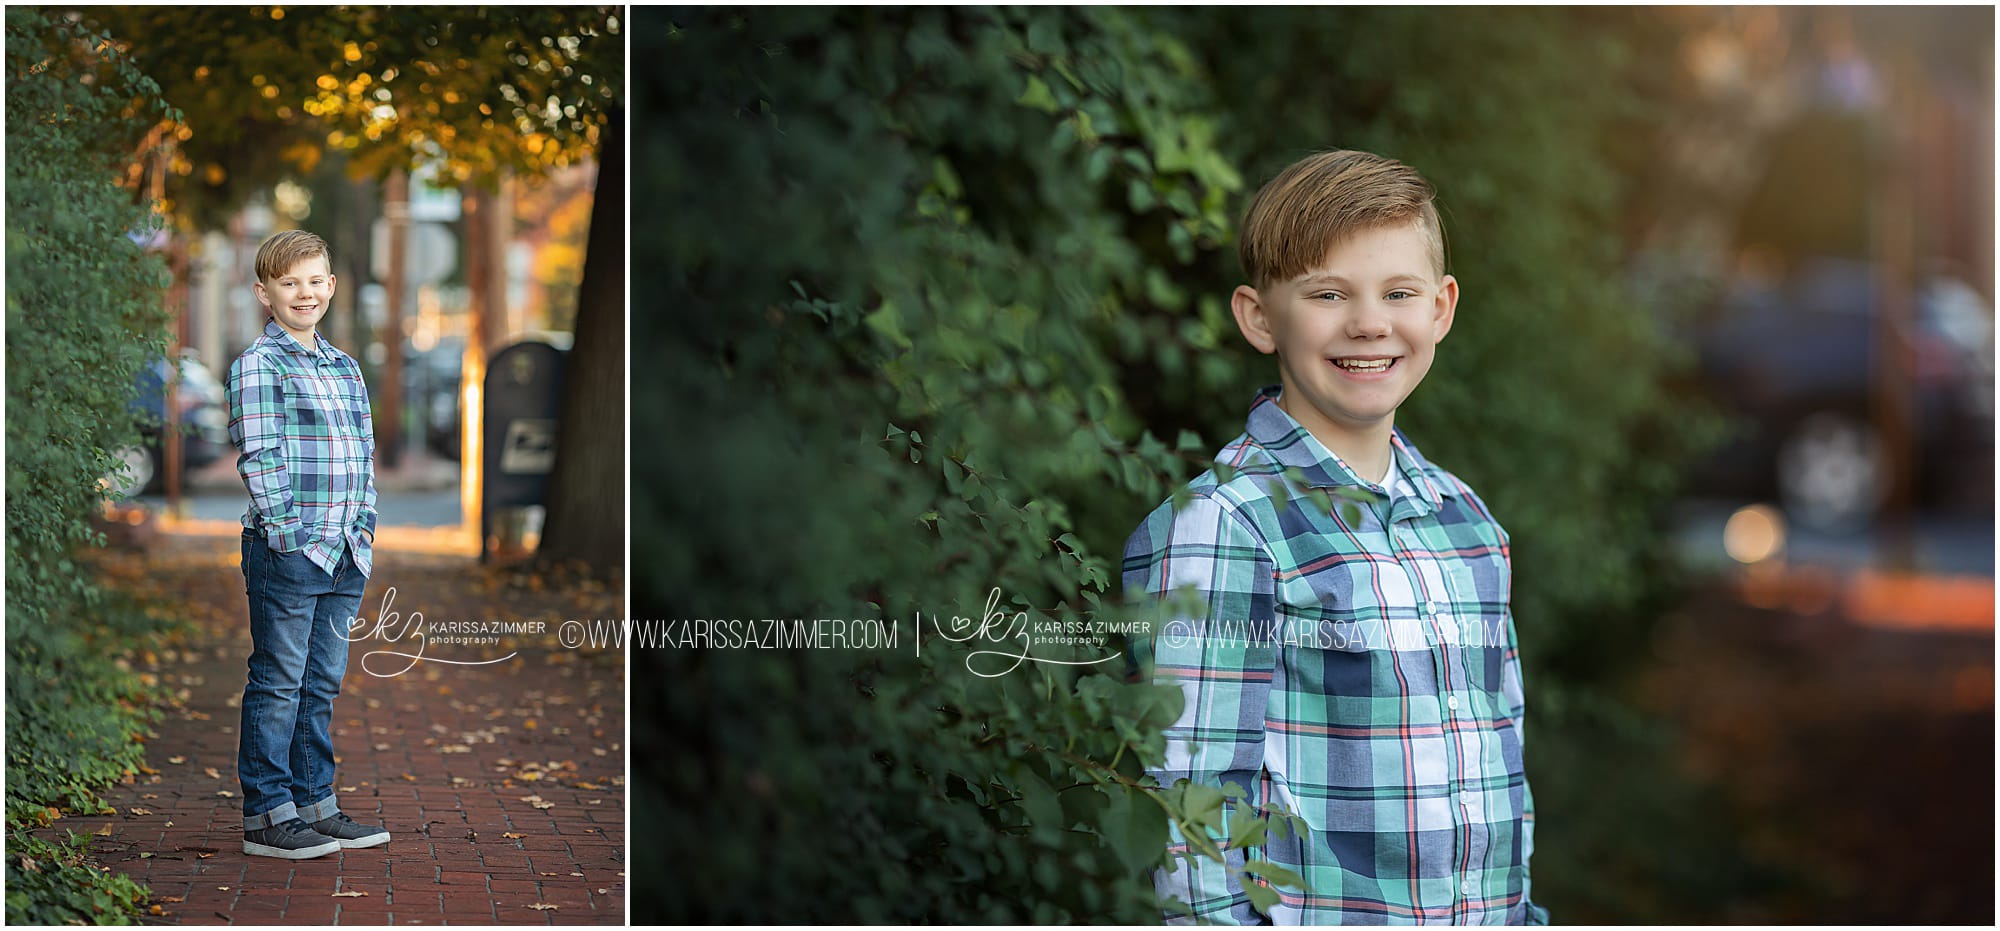 Boy Photographed at Camp Hill Fall Family Photoshoot with Karissa Zimmer Photography